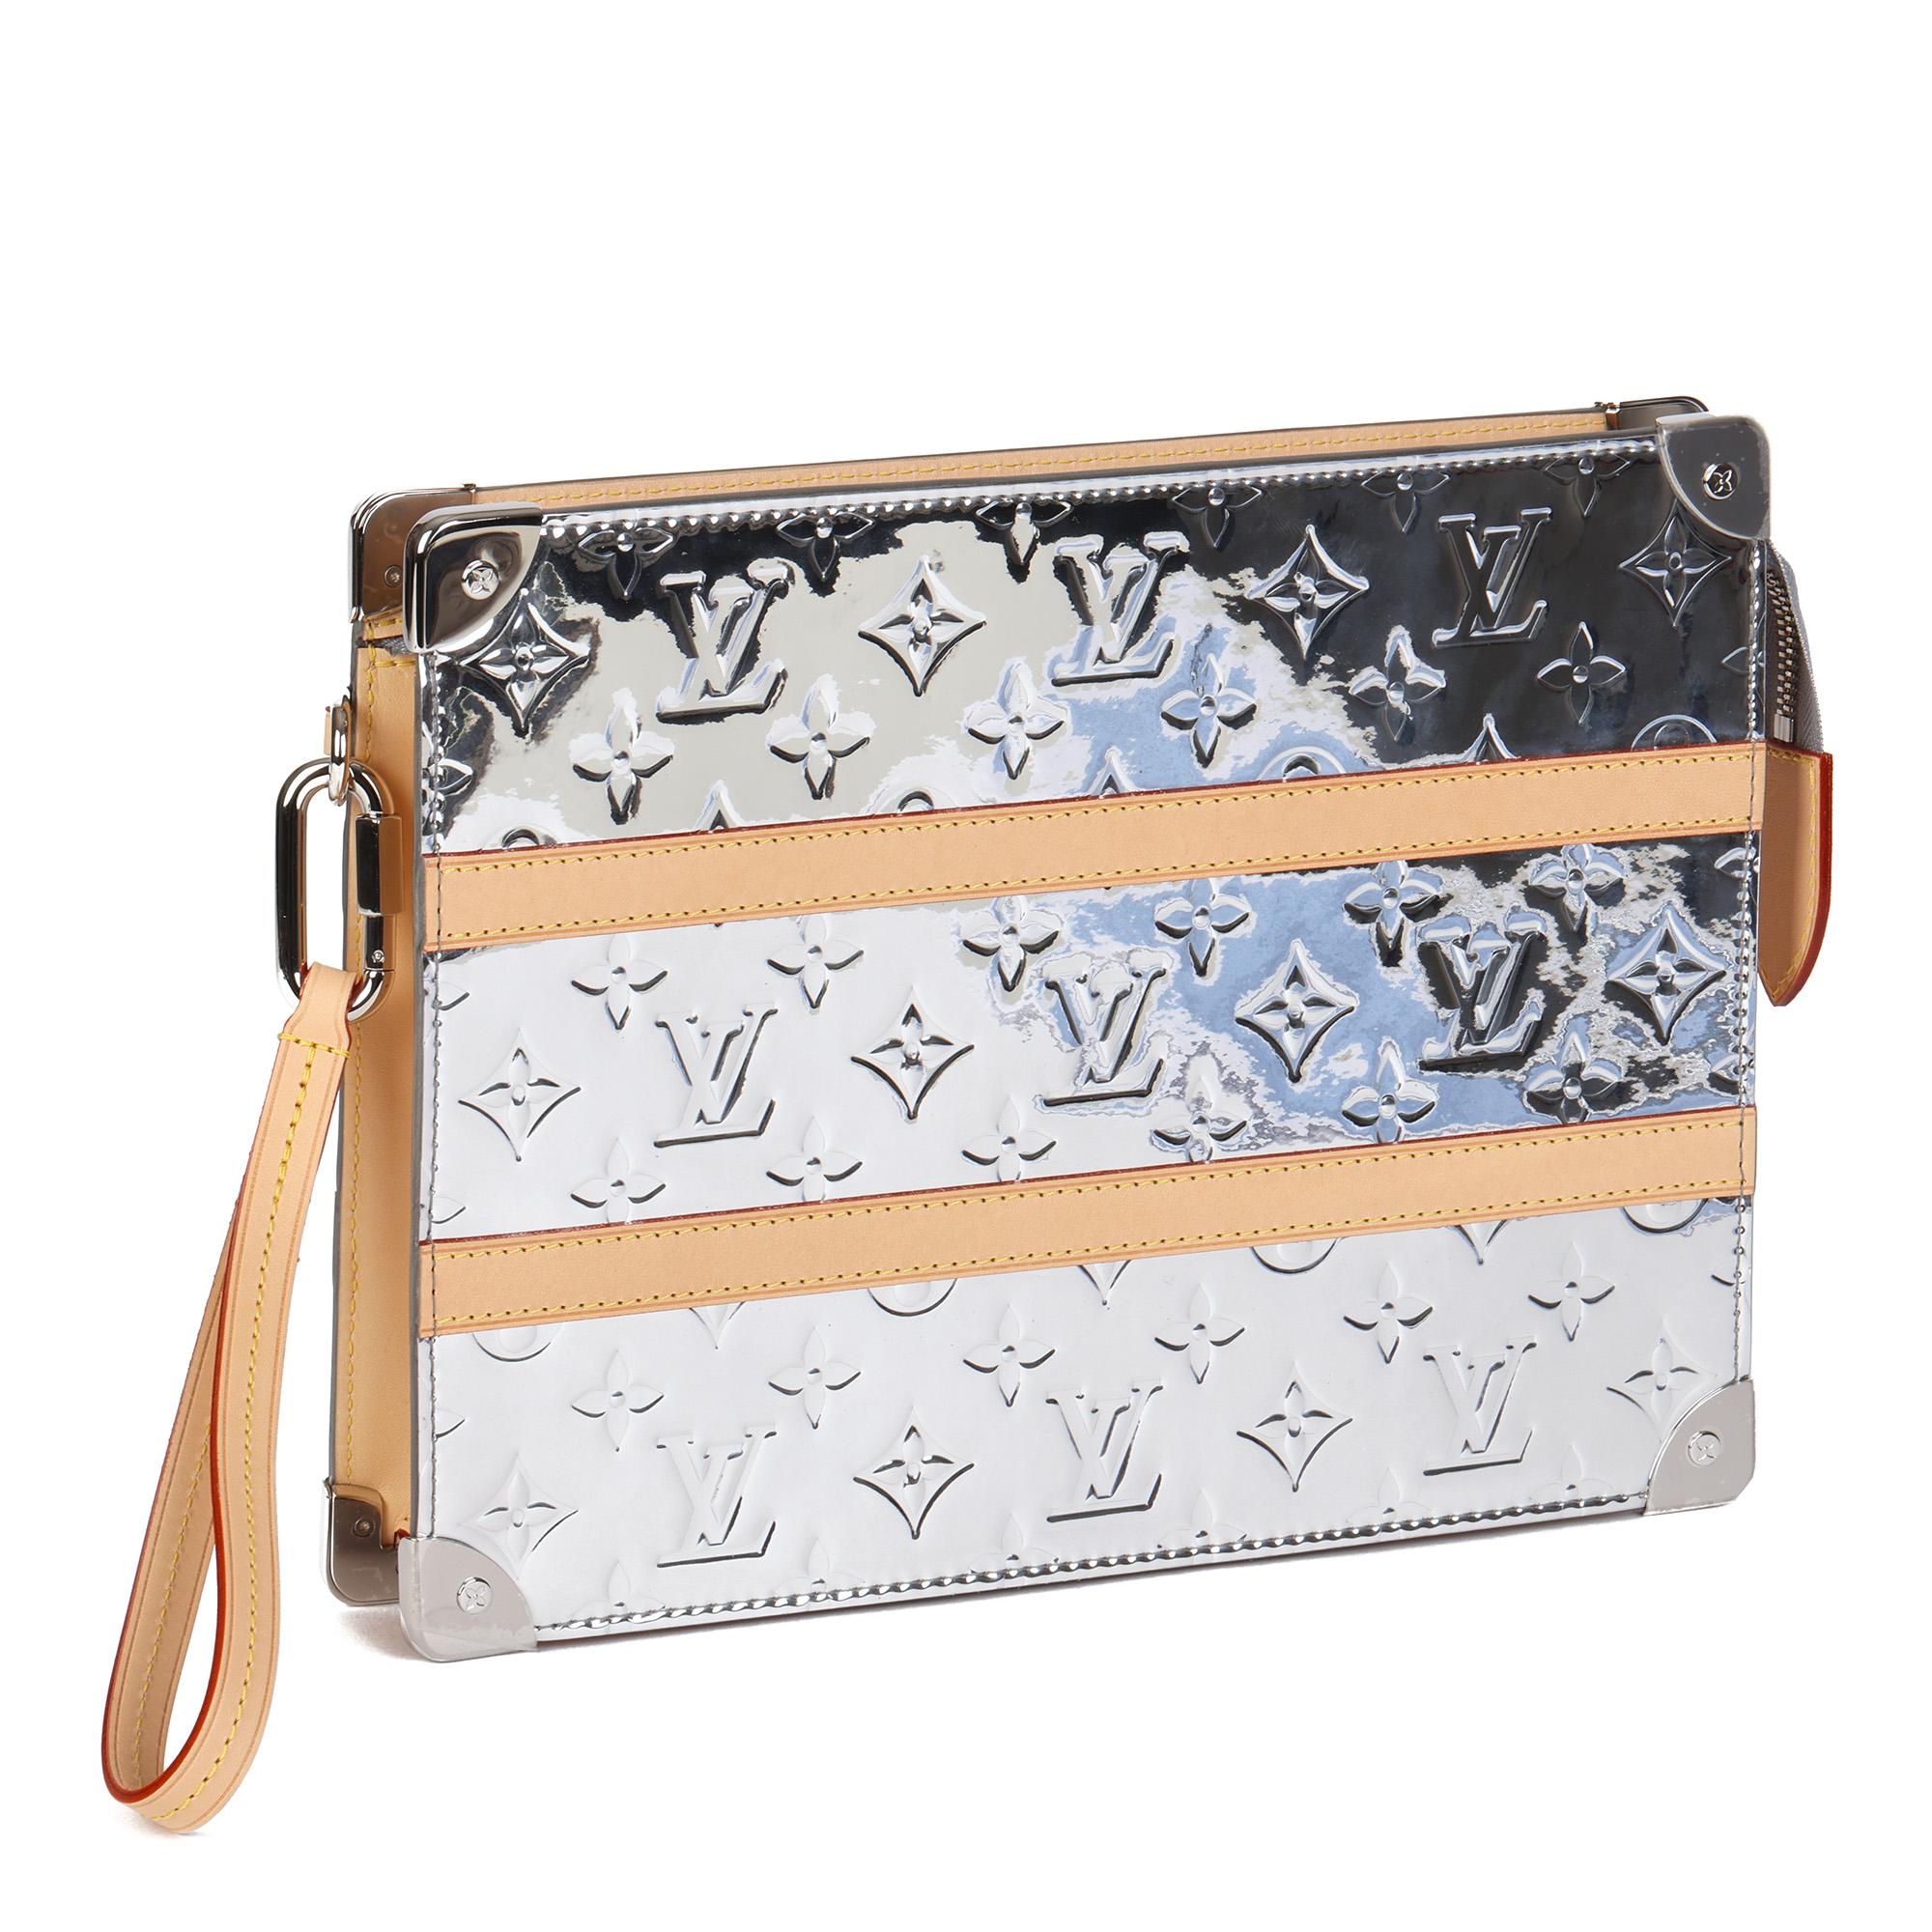 LOUIS VUITTON
Silver Monogram Mirror Vinyl & Vachetta Leather Trunk Pouch

Serial Number: X
Age (Circa): 2021
Accompanied By: Louis Vuitton Dust Bag, Box
Authenticity Details: (Made in France)
Gender: Ladies
Type: Clutch, Wristlet

Colour: